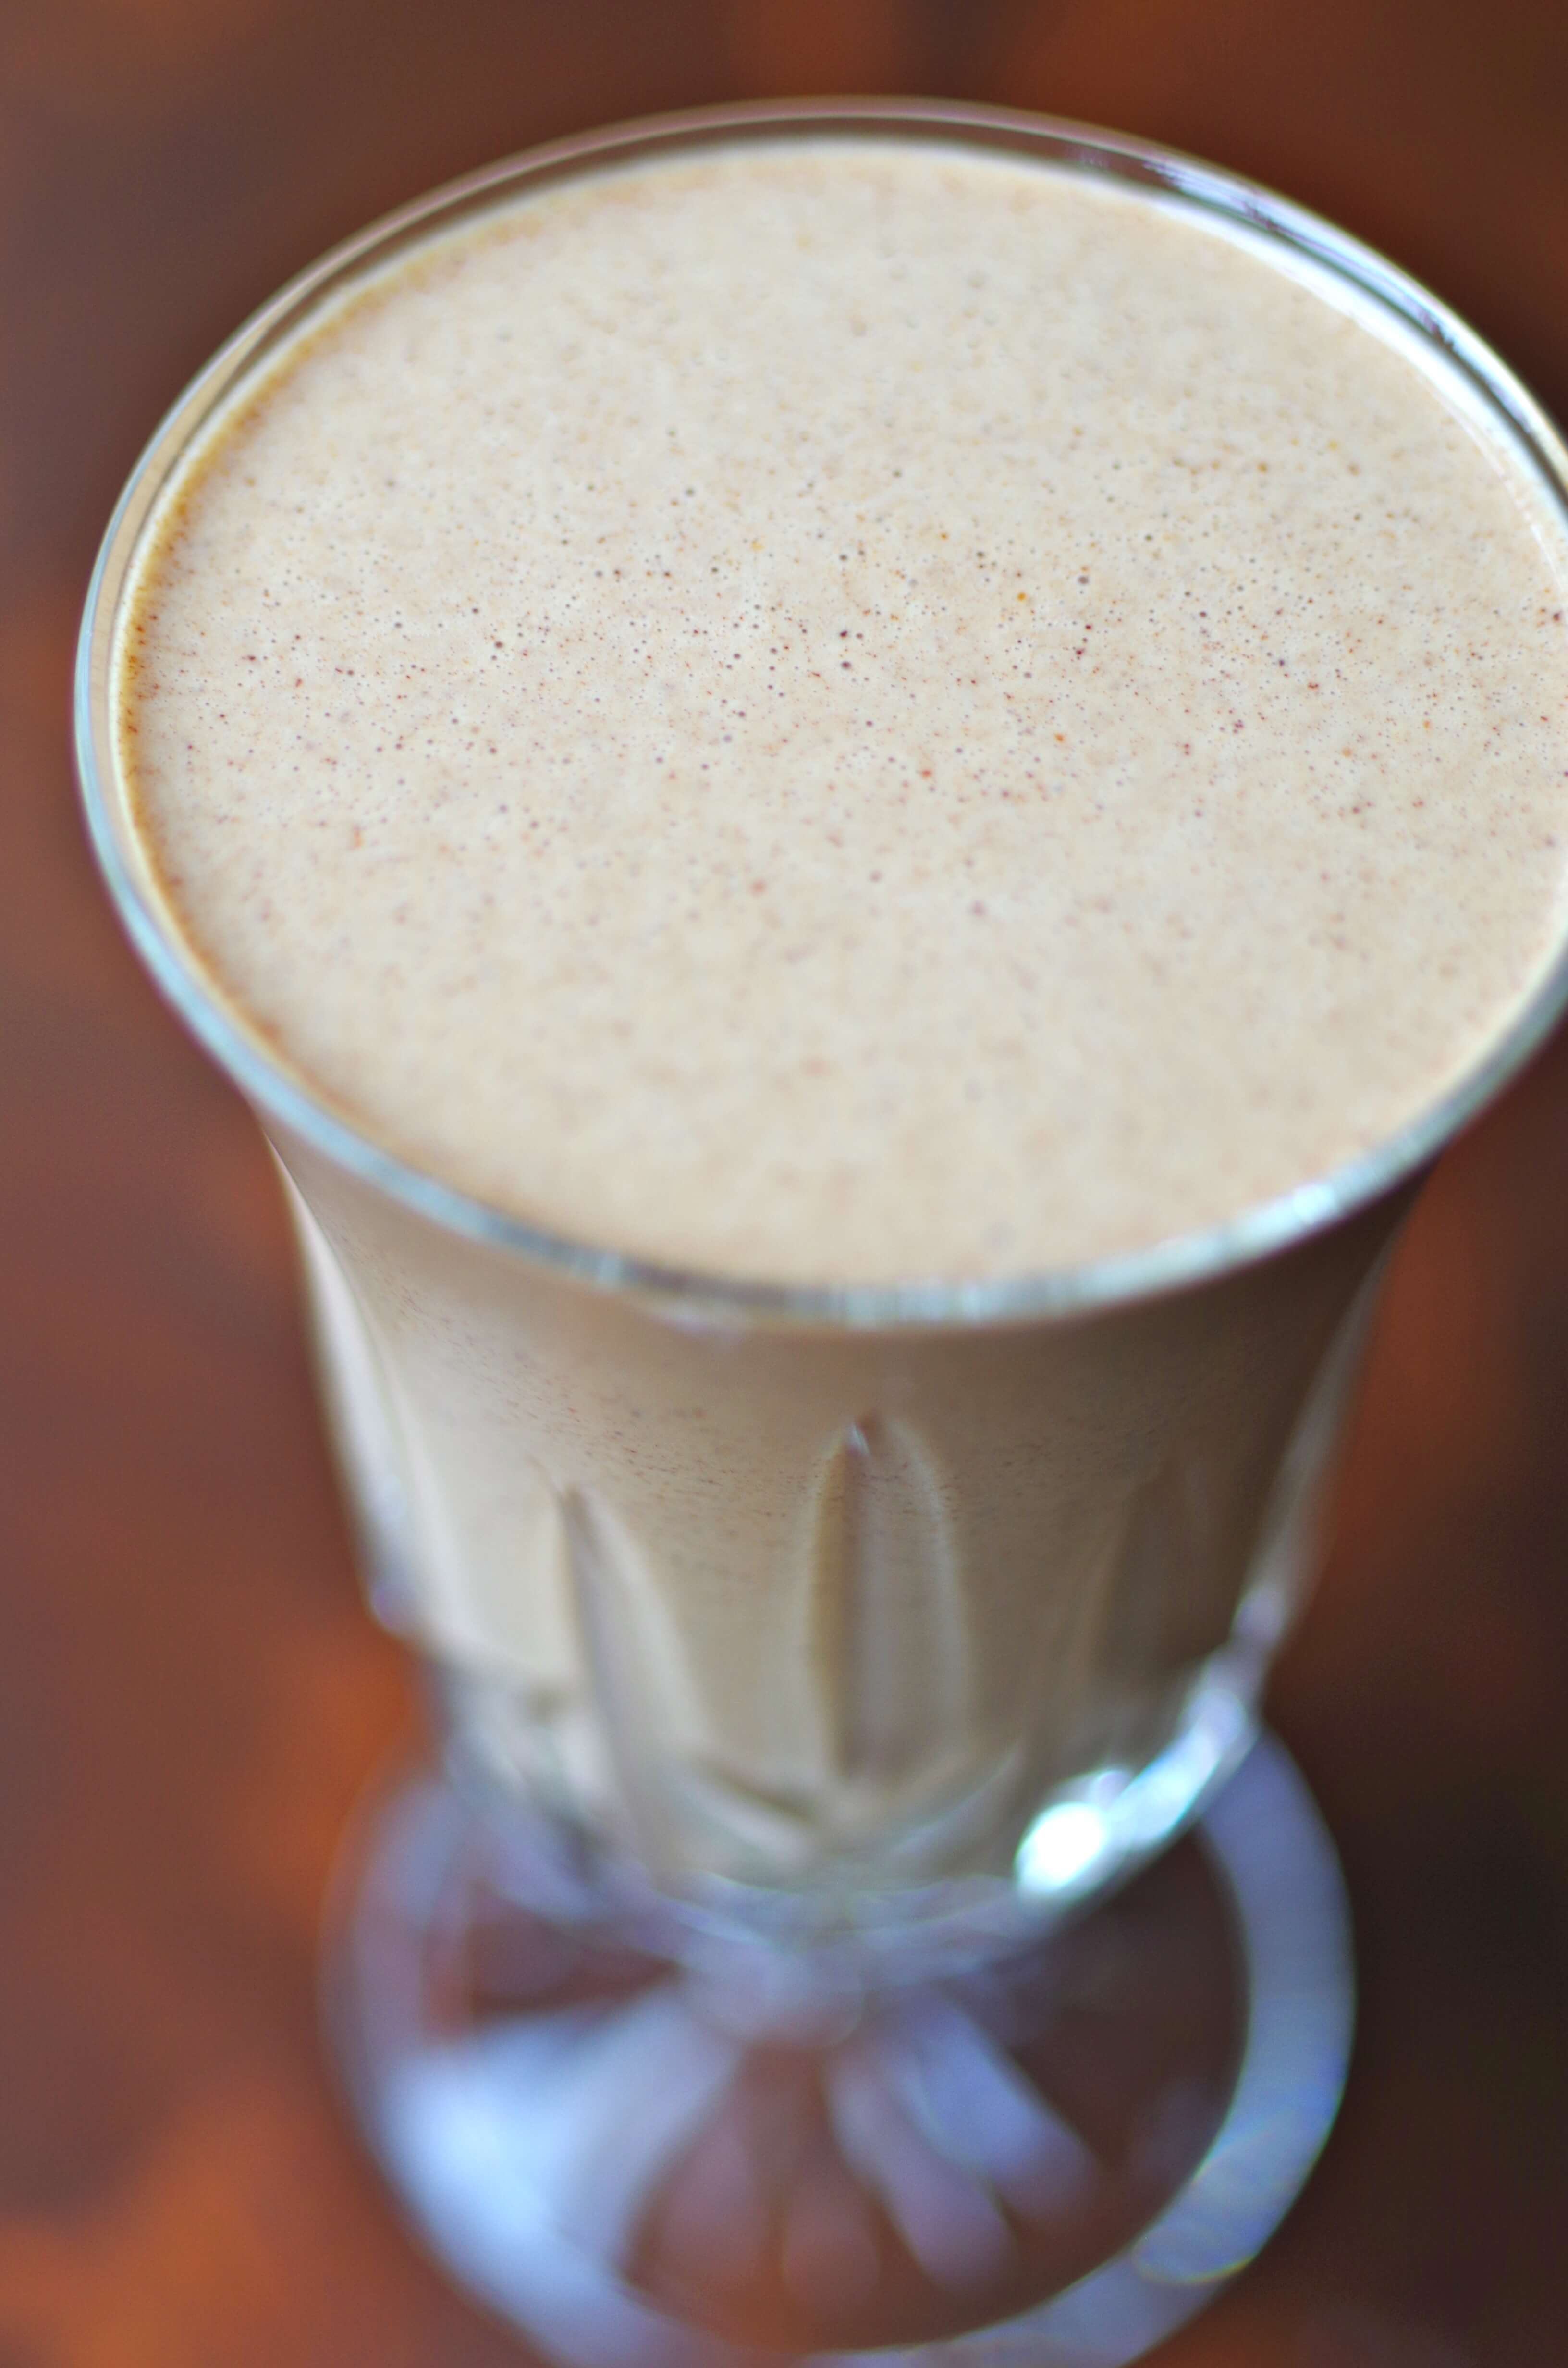 Chocolate Almond Smoothie - Quick easy "pick me up" full of protein and antioxidants. | www.lakesidetable.com